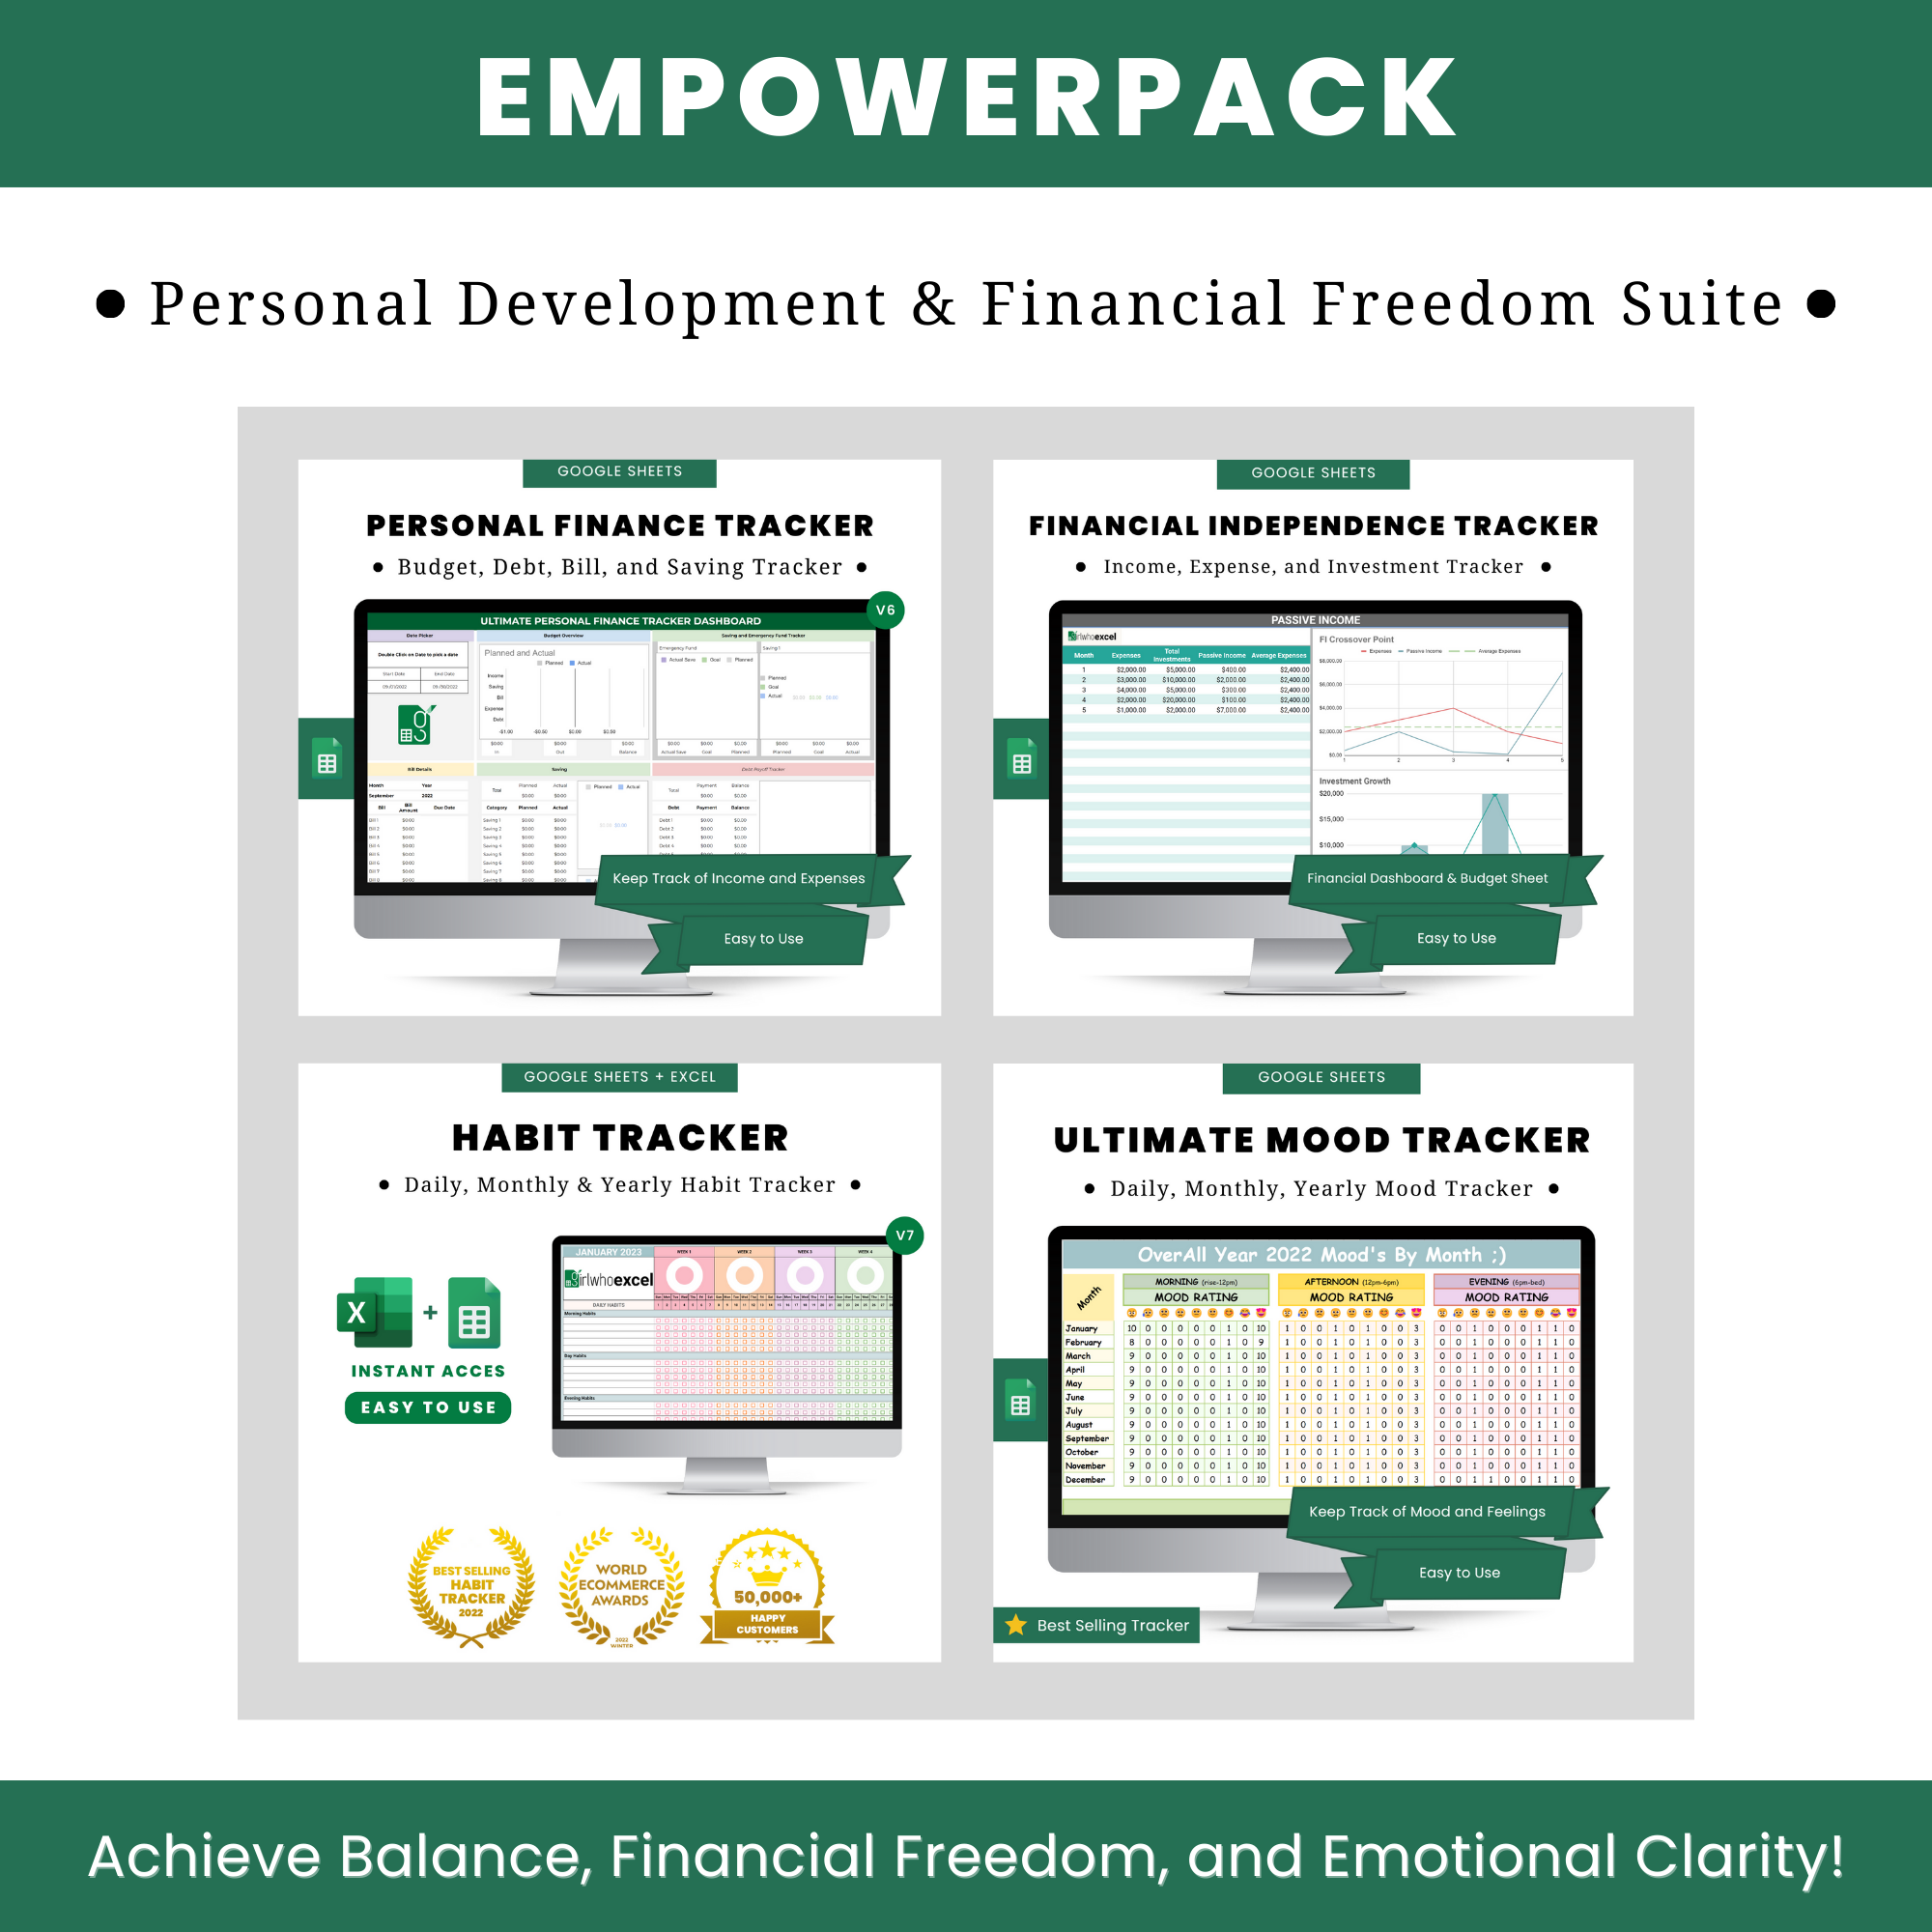 EmpowerPack: Personal Development & Financial Freedom Suite